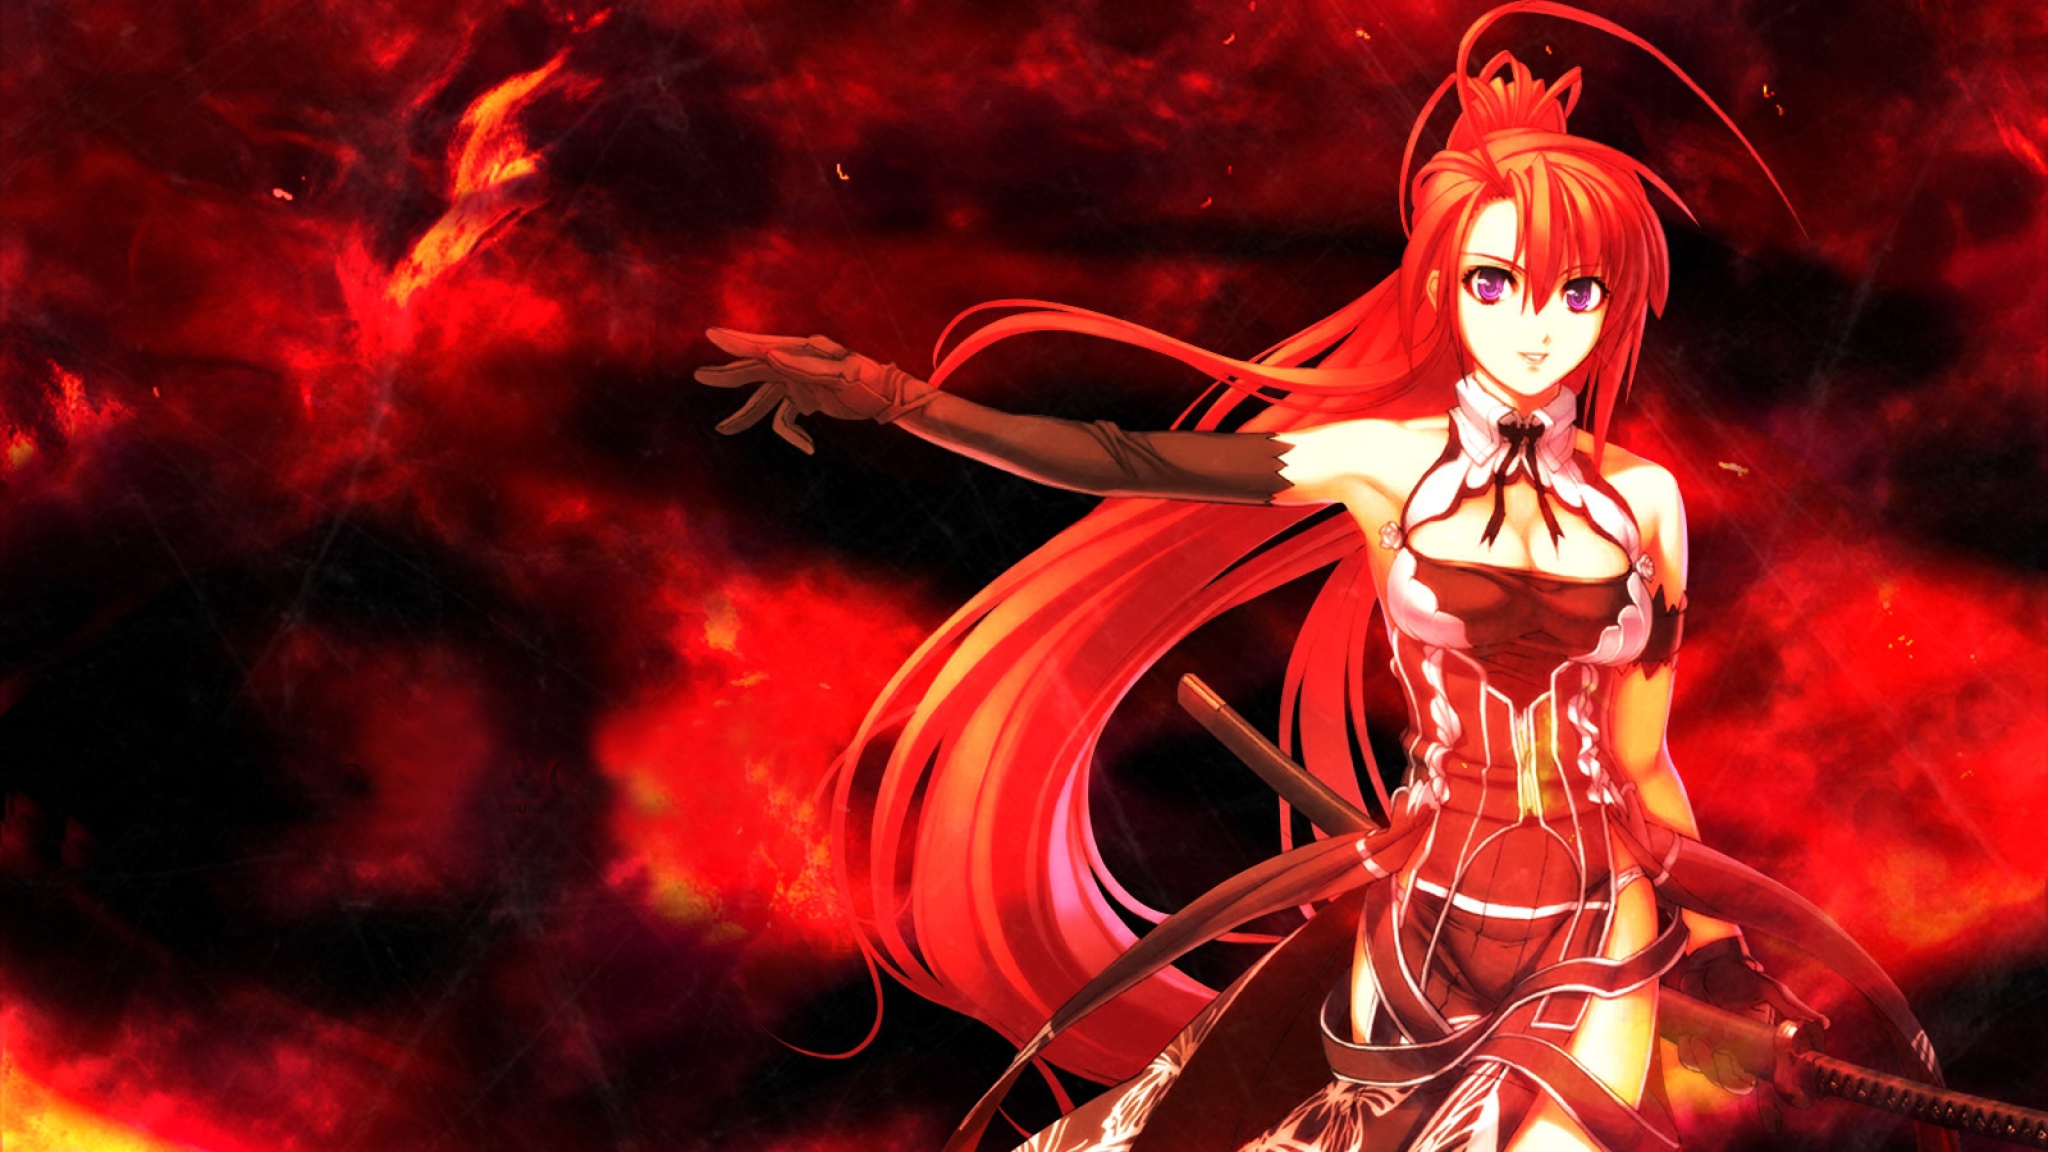 Download Wallpaper 2048x1152 anime girl red hair sword background